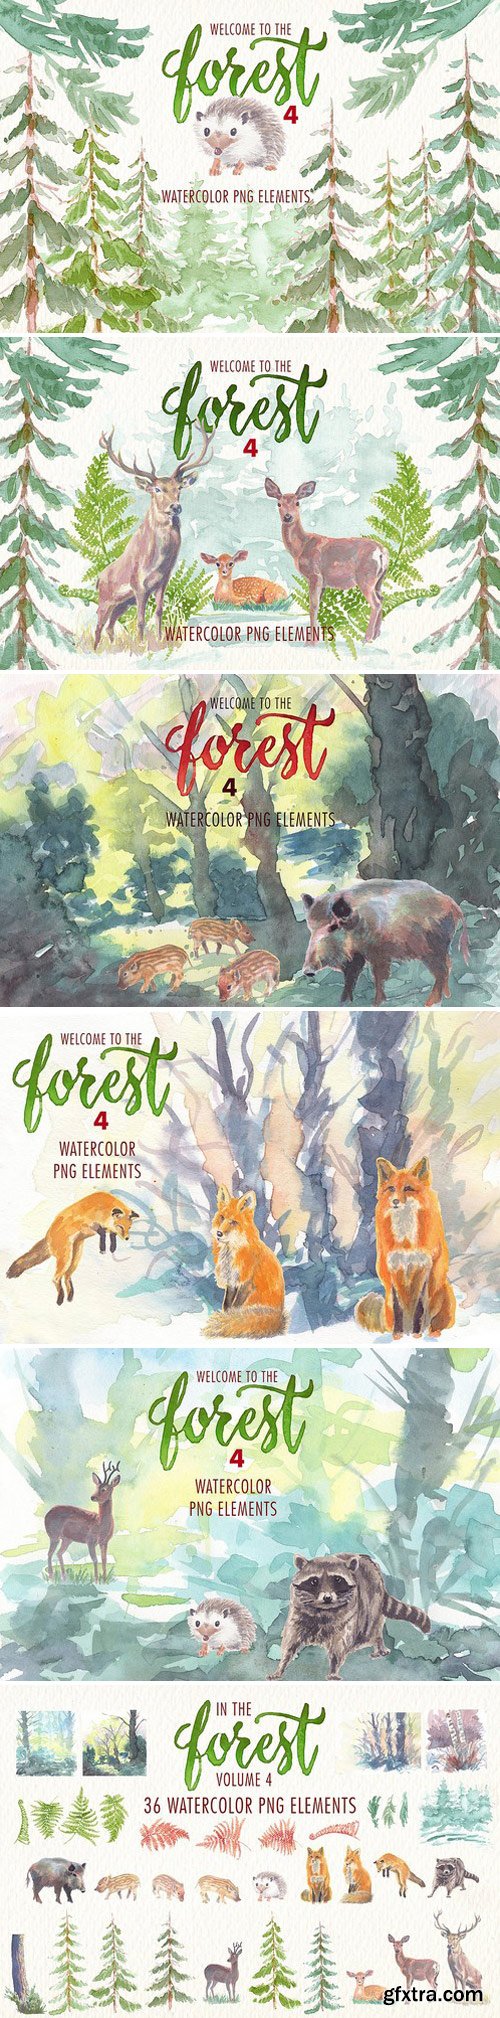 CM - watercolor in the forest clipart 1926459